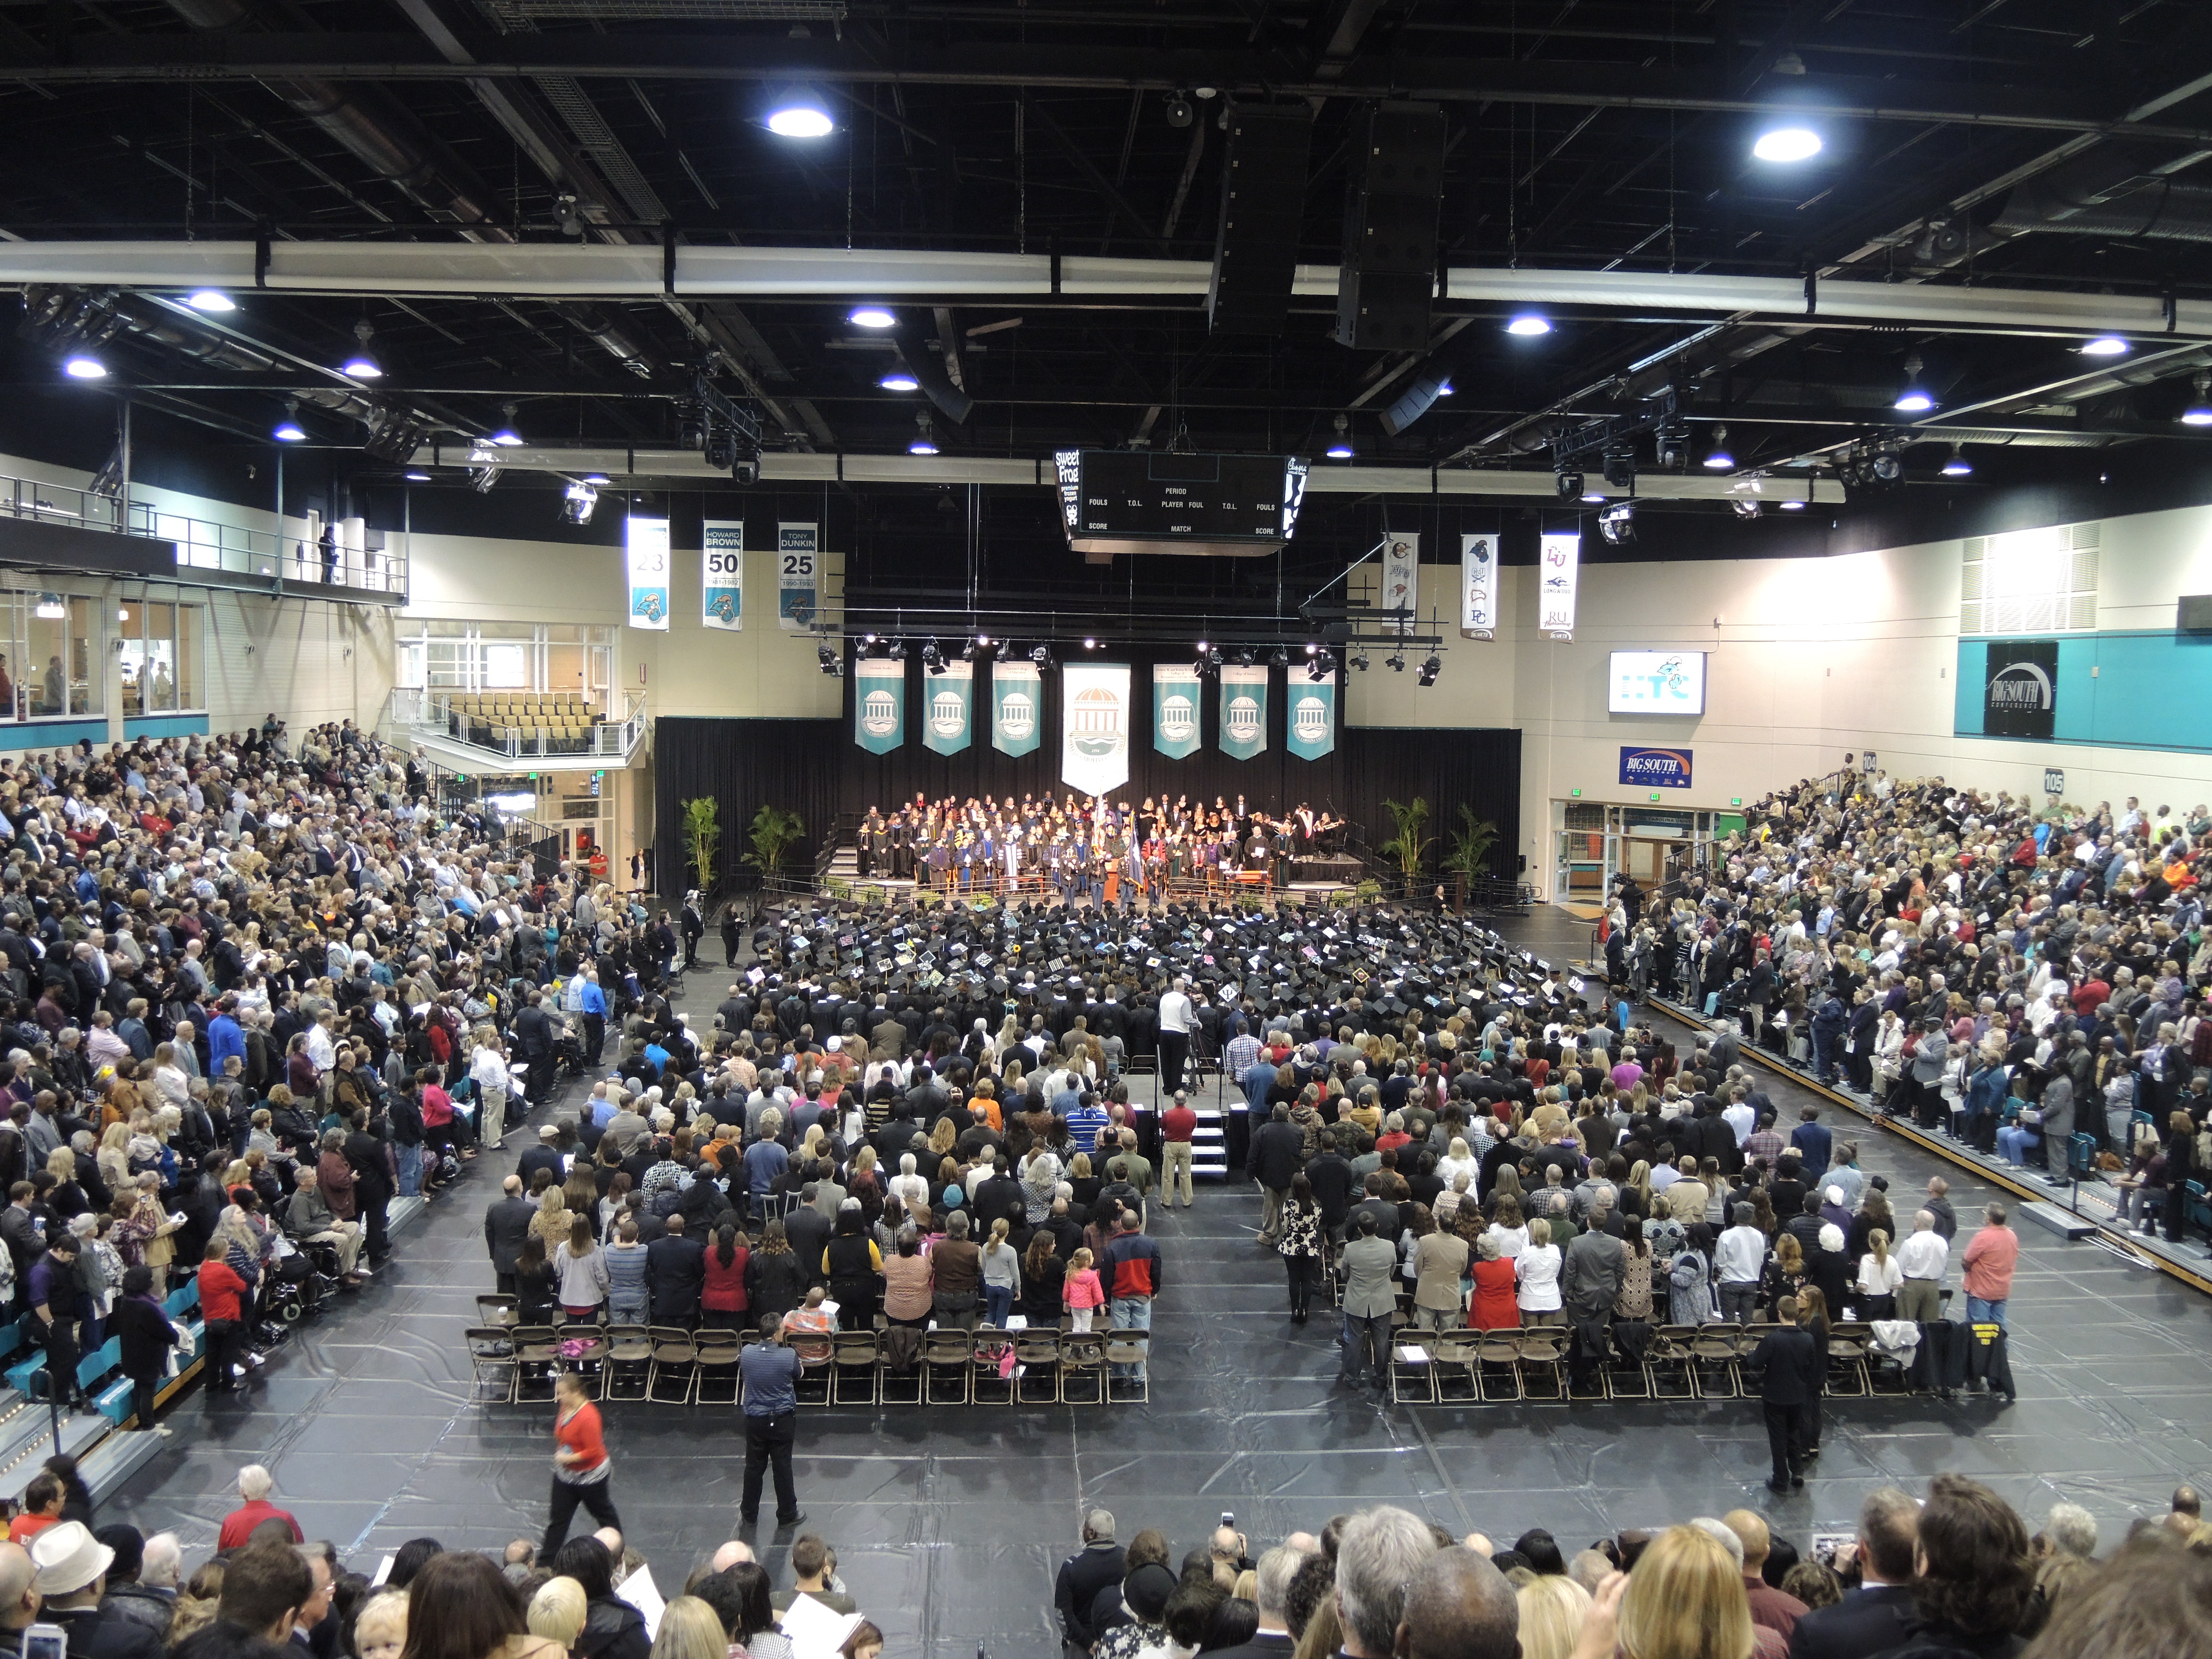 Graduation will now take place in the HTC Center, our on-campus arena.